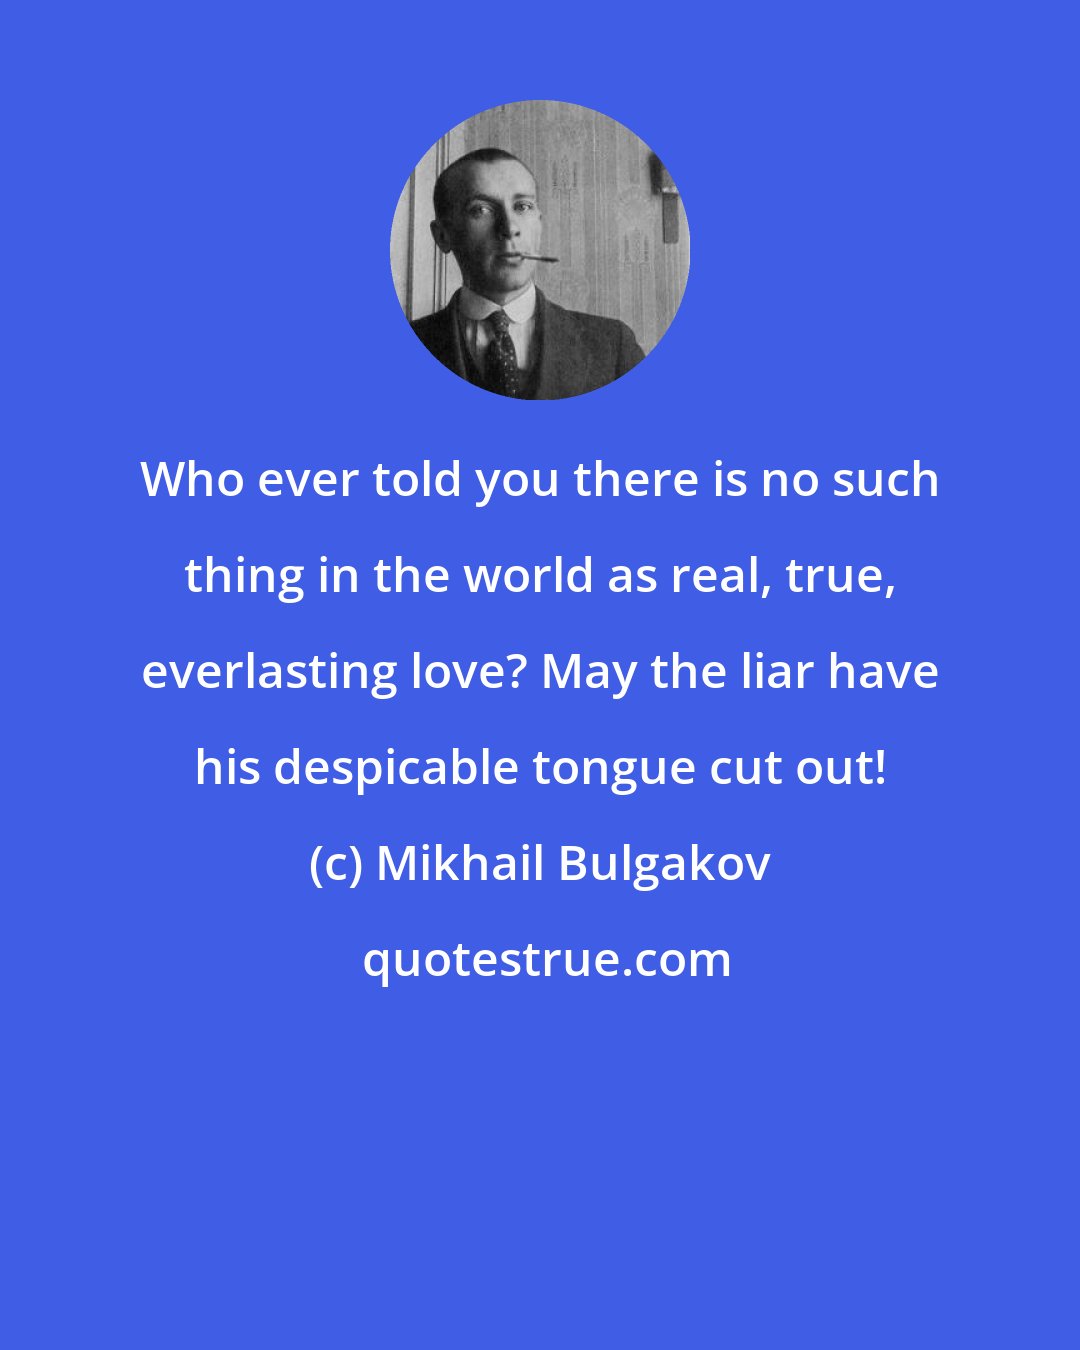 Mikhail Bulgakov: Who ever told you there is no such thing in the world as real, true, everlasting love? May the liar have his despicable tongue cut out!